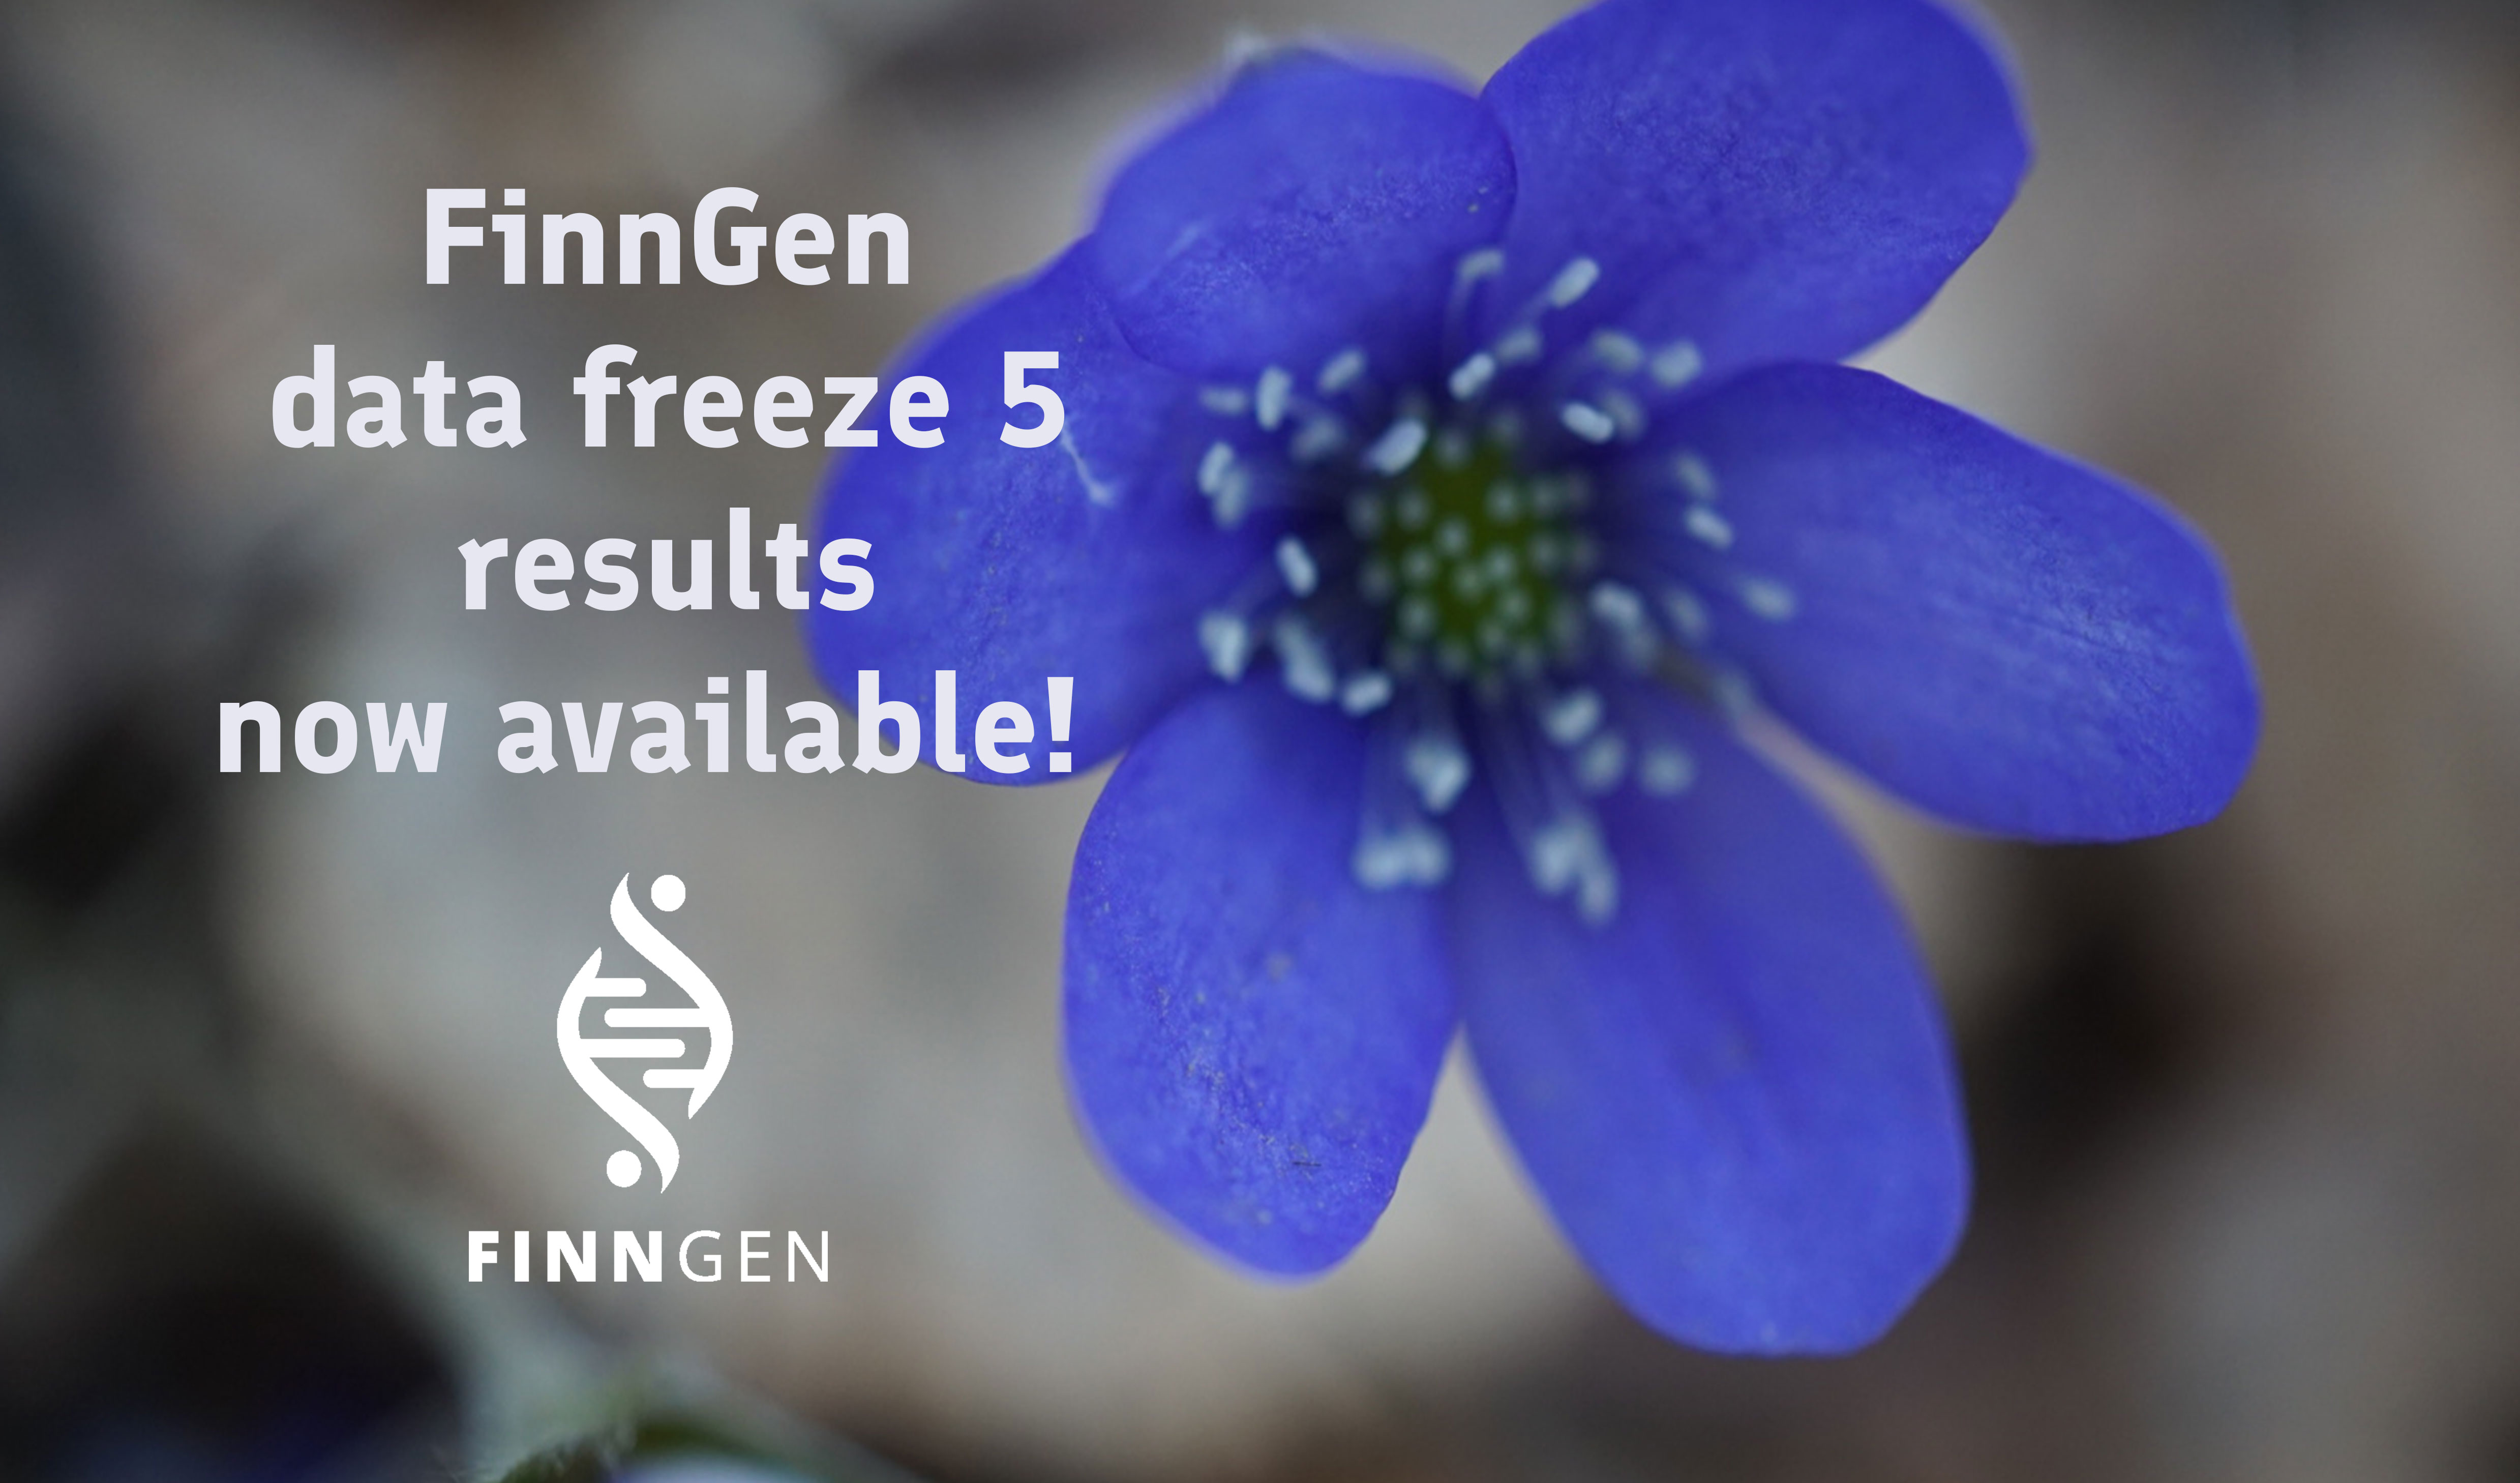 FinnGen research project is an expedition to the frontier of genomics and medicine